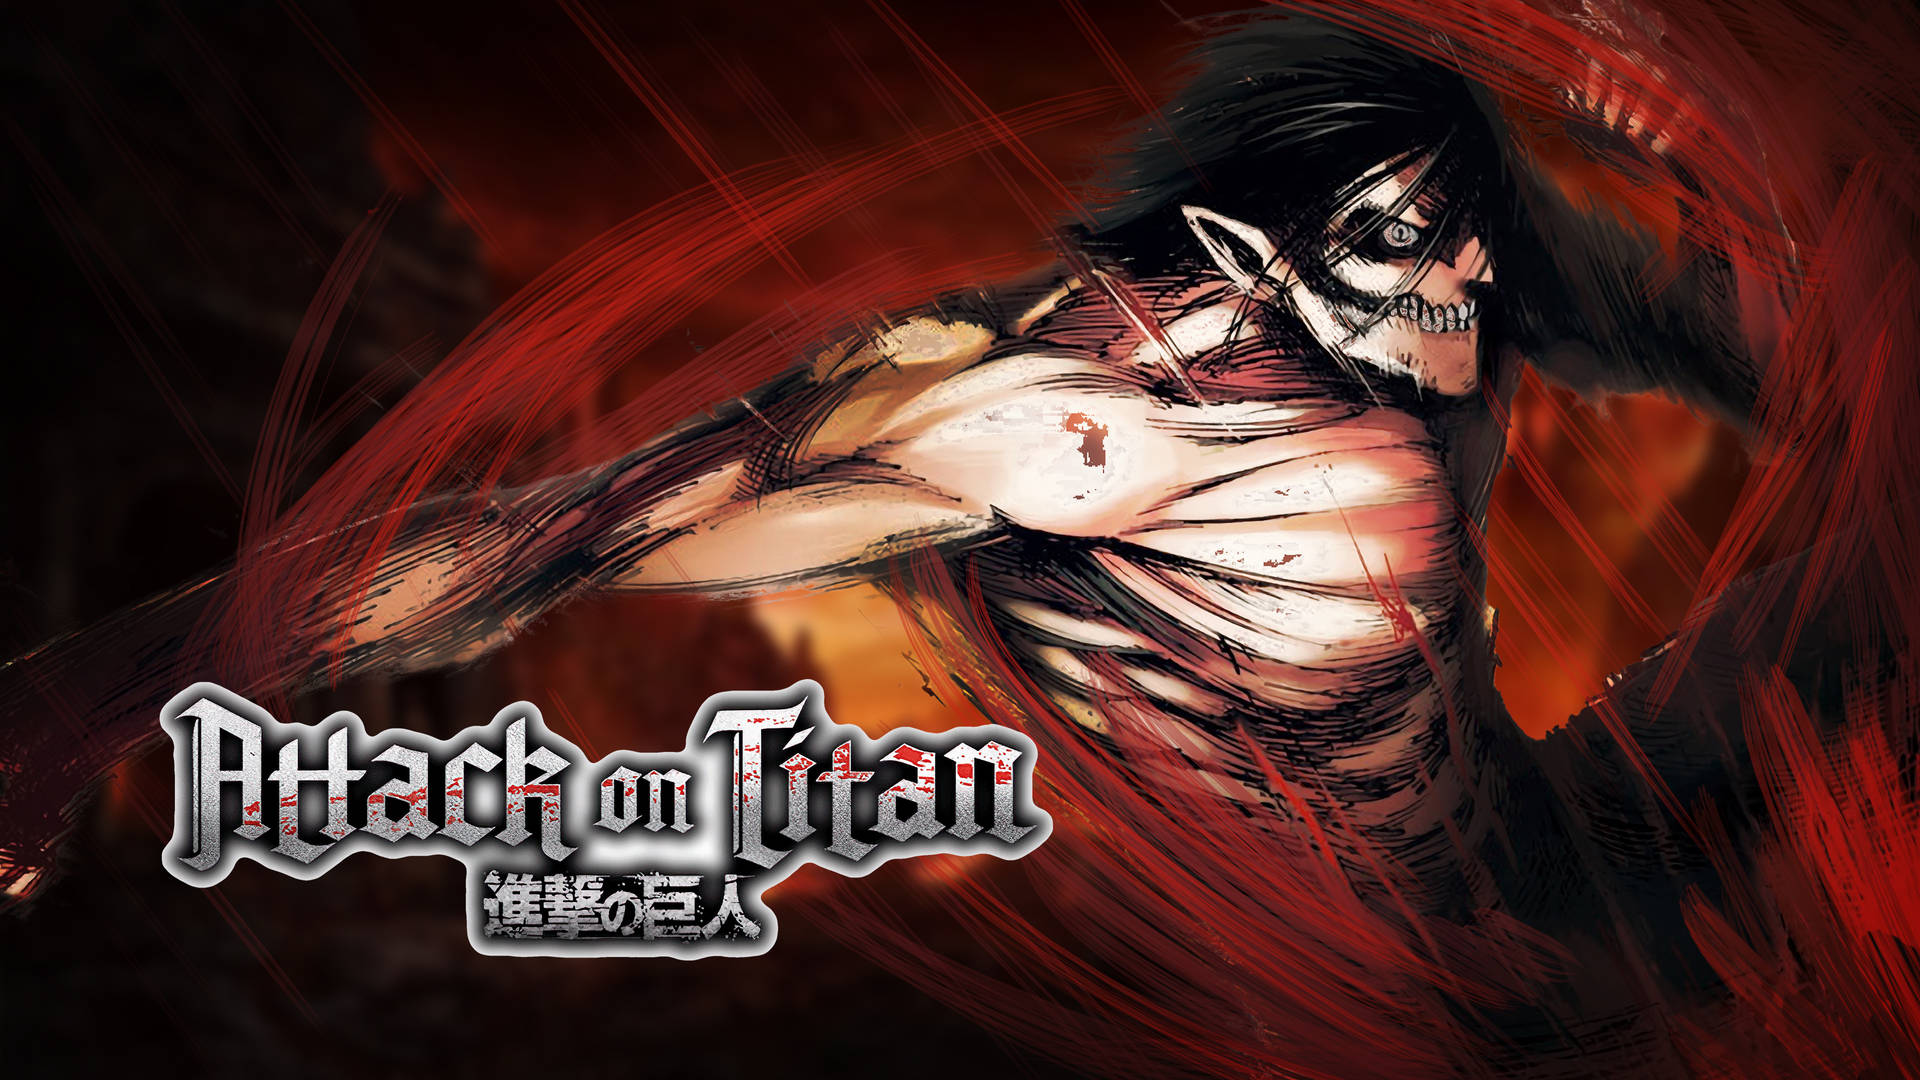 100+] Attack On Titan 4k Wallpapers 